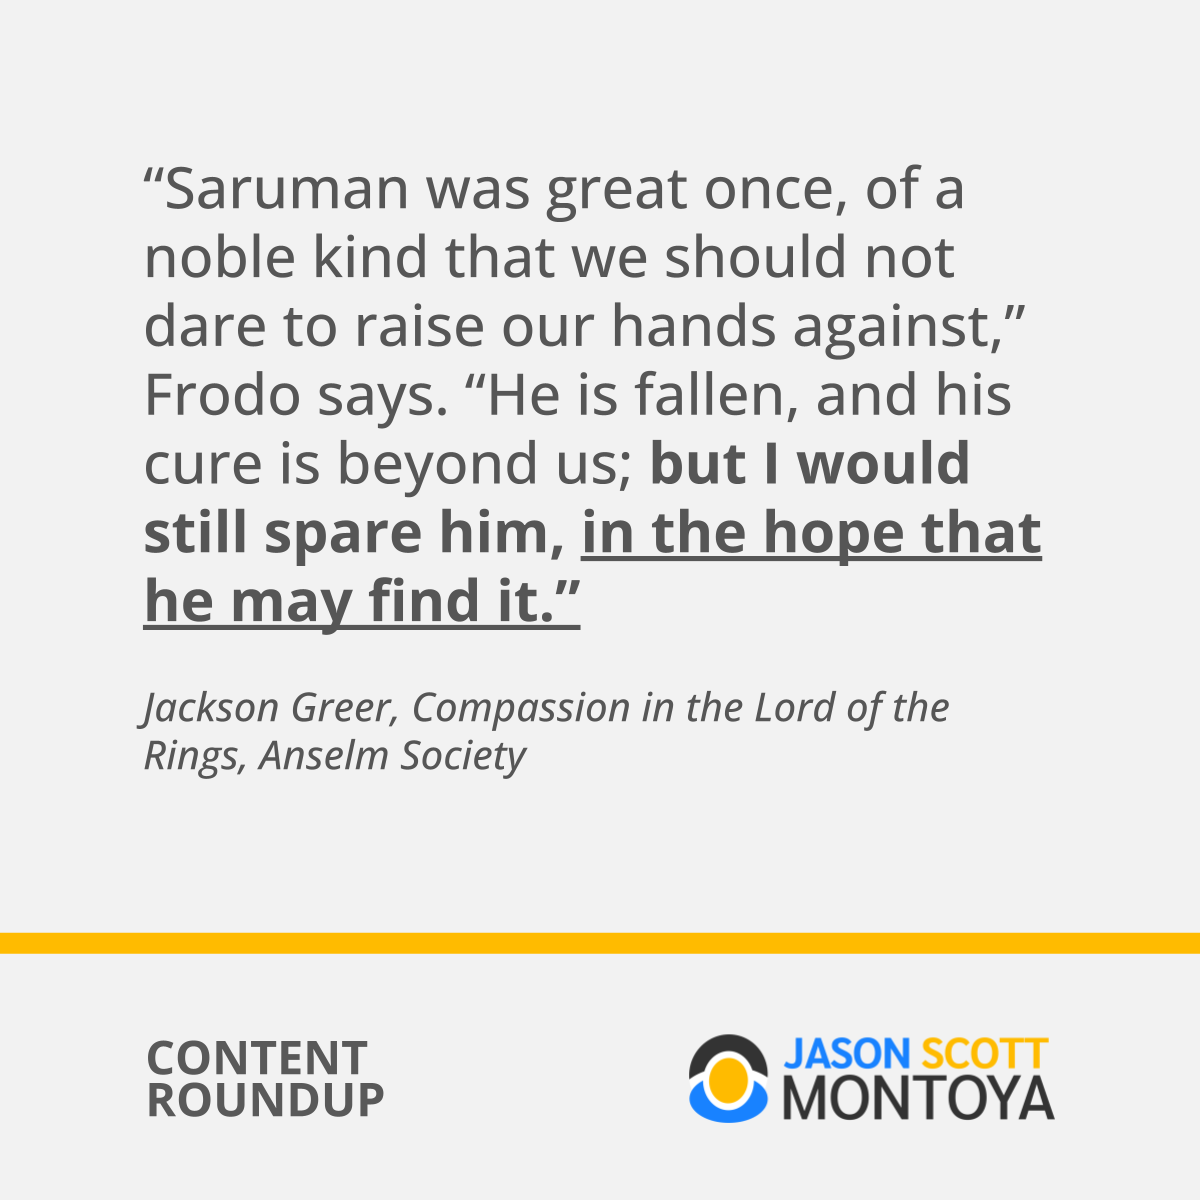 “Saruman was great once, of a noble kind that we should not dare to raise our hands against,” Frodo says. “He is fallen, and his cure is beyond us; but I would still spare him, in the hope that he may find it.”  Jackson Greer, Compassion in the Lord of the Rings, Anselm Society